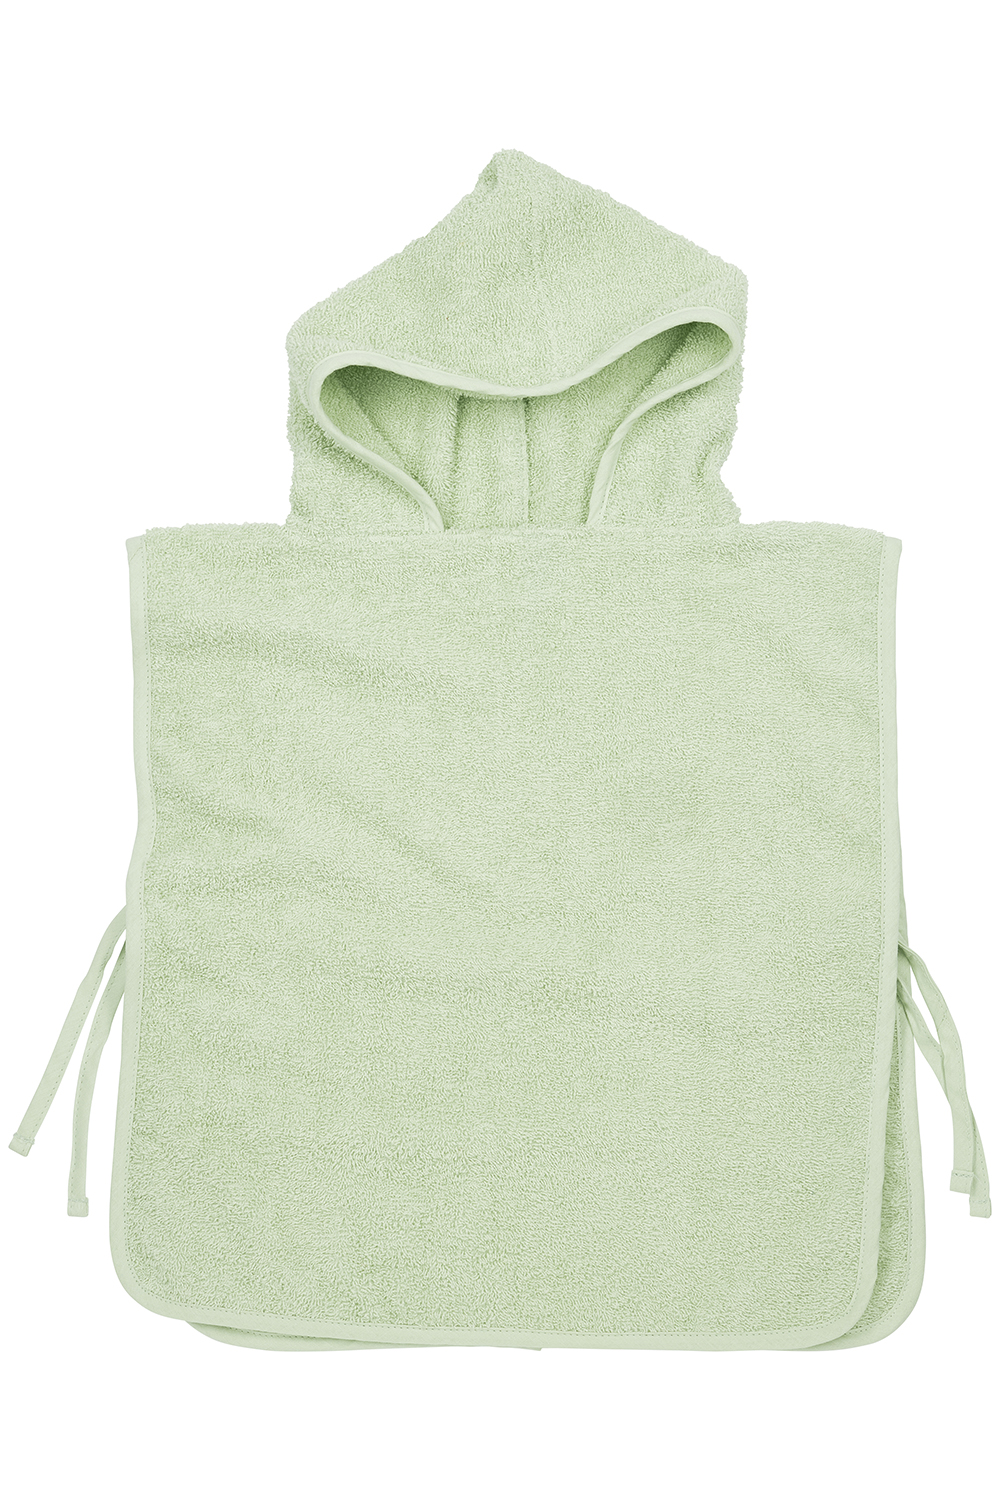 Badeponcho frottee Uni - soft green - 1-3 Jahre